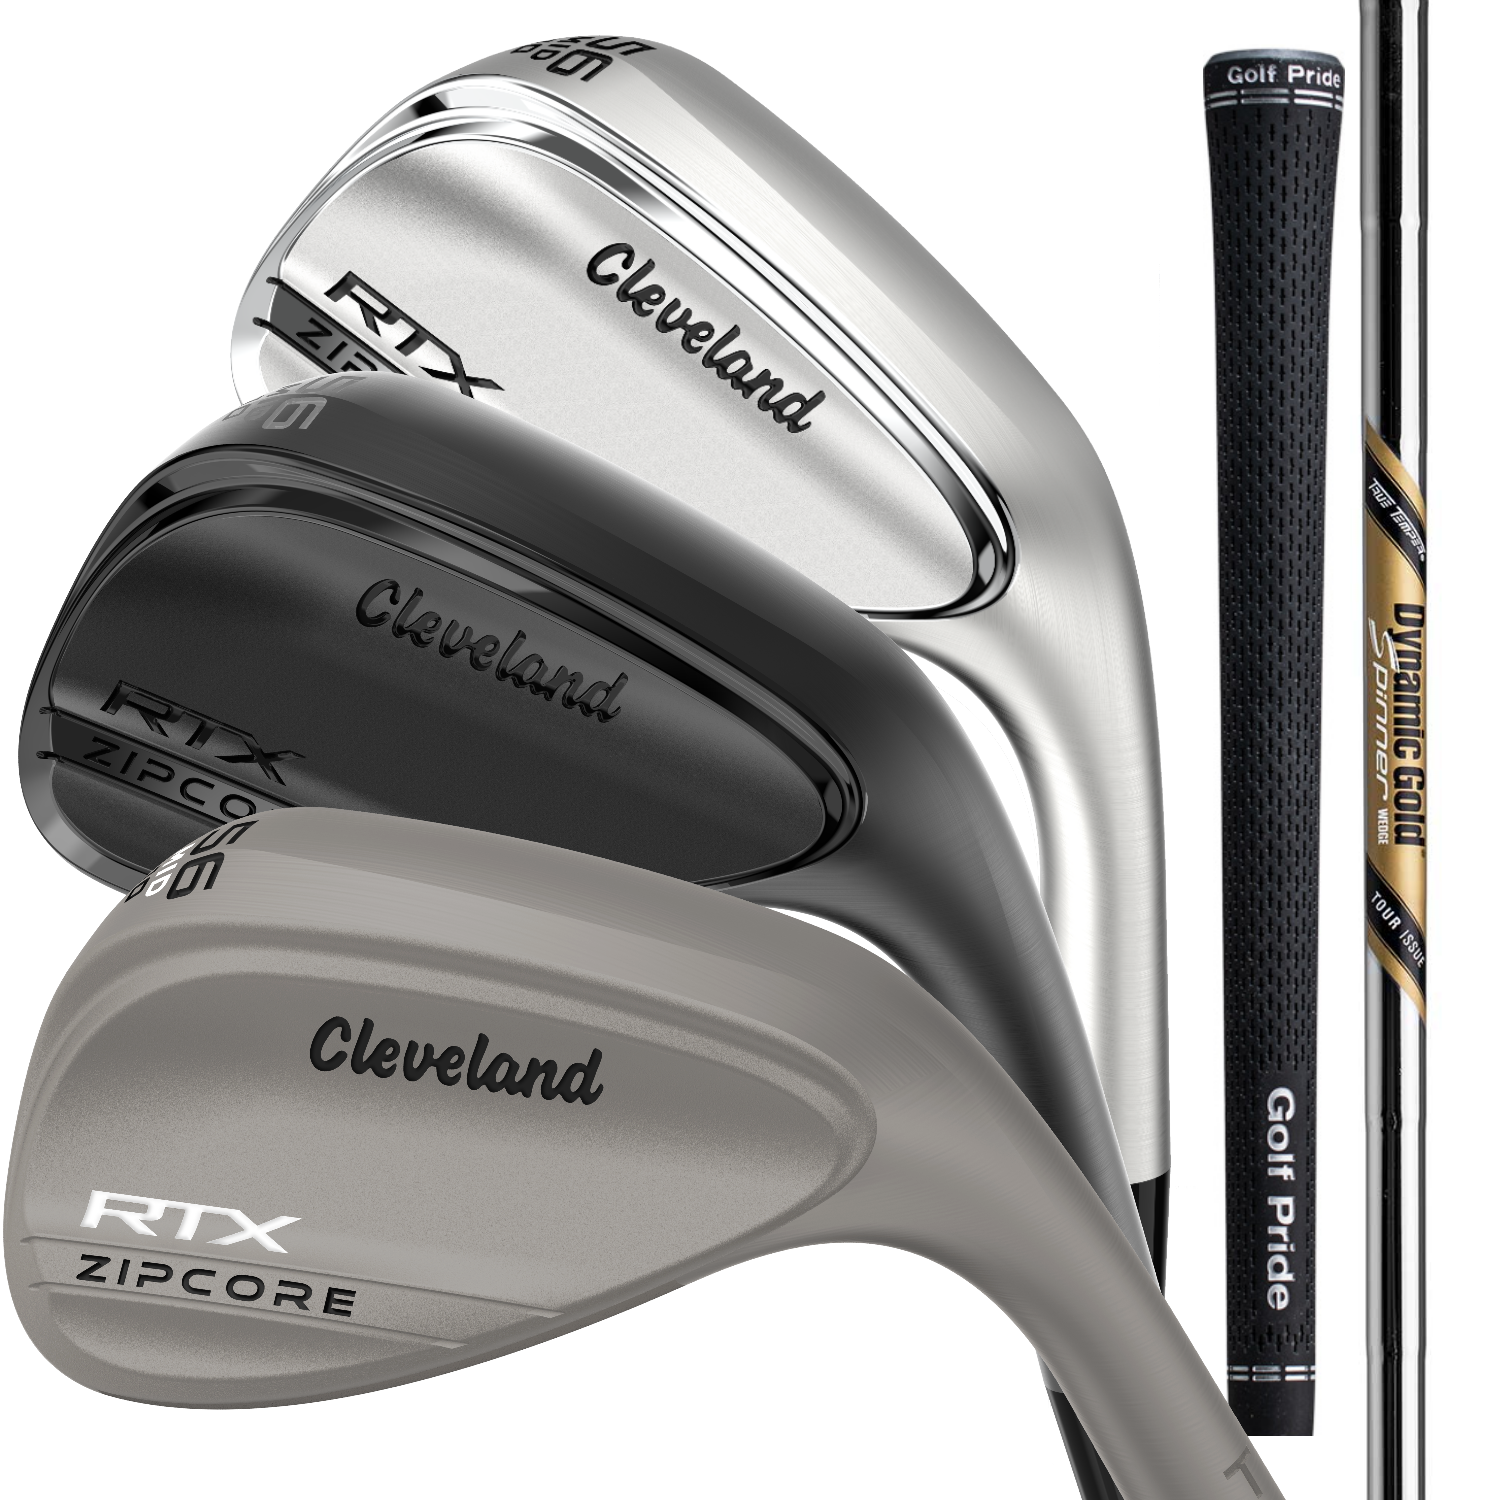 Cleveland RTX Zipcore Wedge - Dynamic Gold Spinner Tour Issu